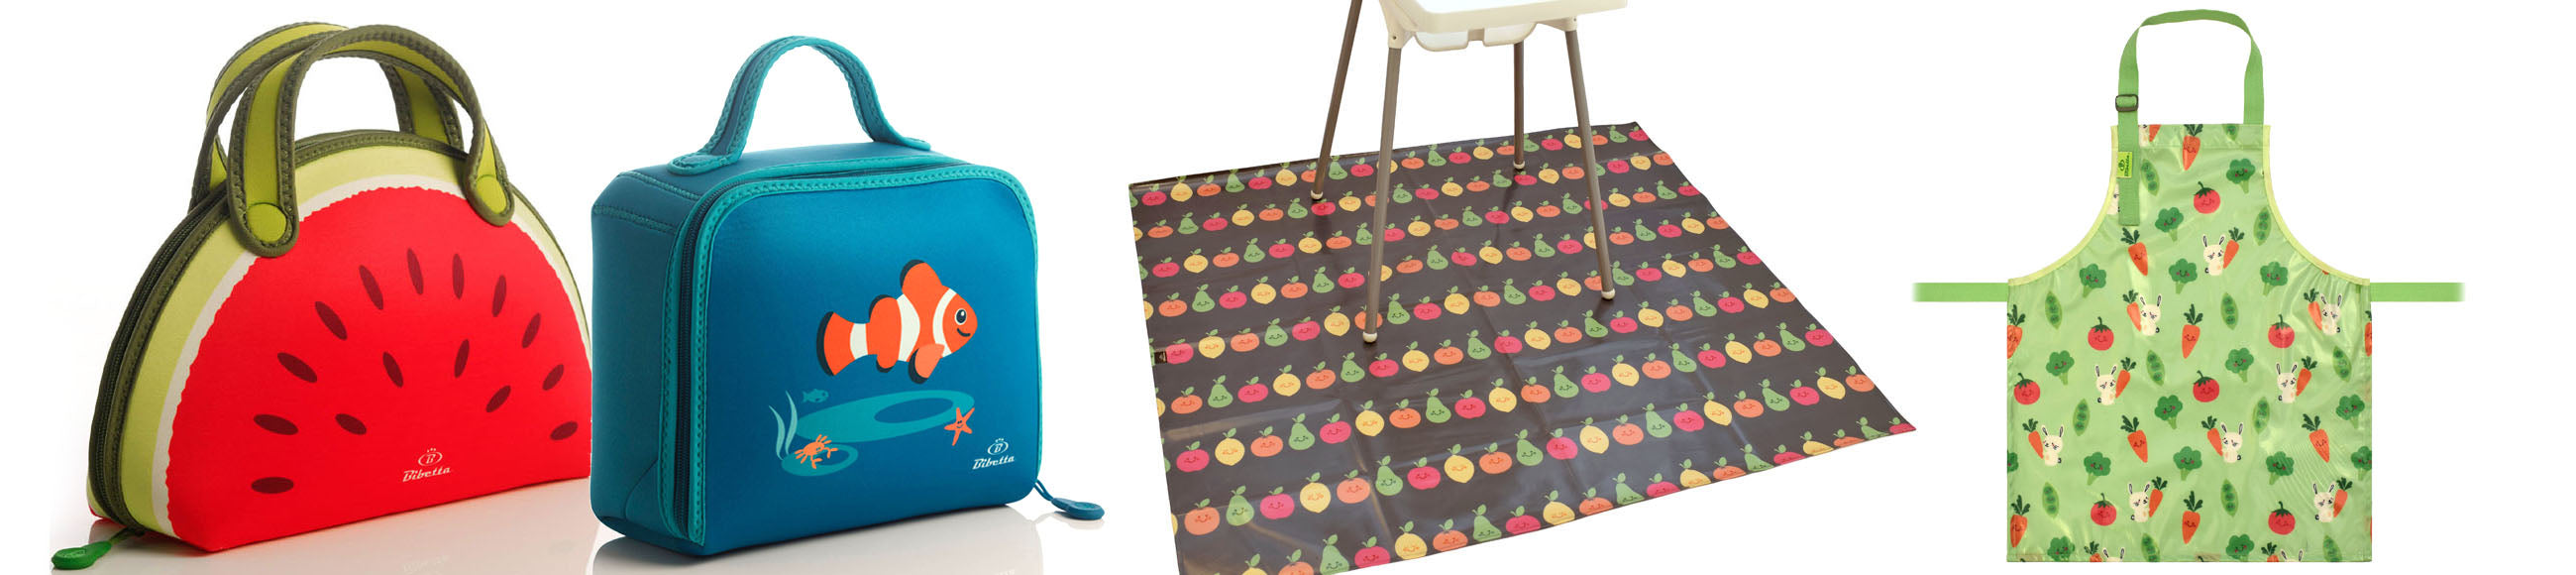 Bibetta Accessories including Neoprene Lunch Bags, Splash Mats and cooking and craft Aprons.